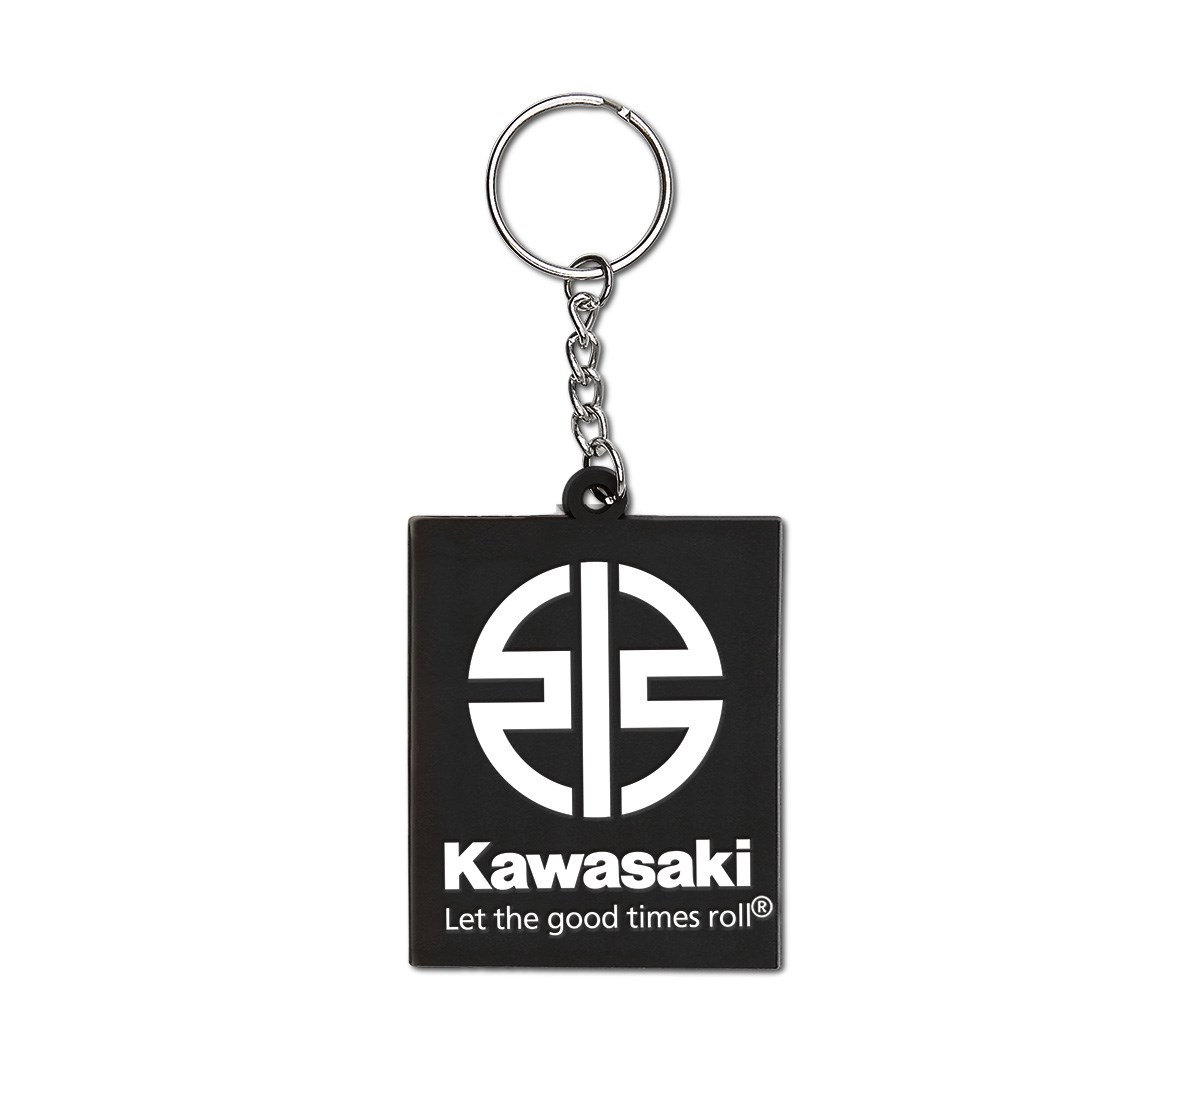 For Kawasaki Keychain Green Rubber Key Ring Motorcycle Collectible Green Cool